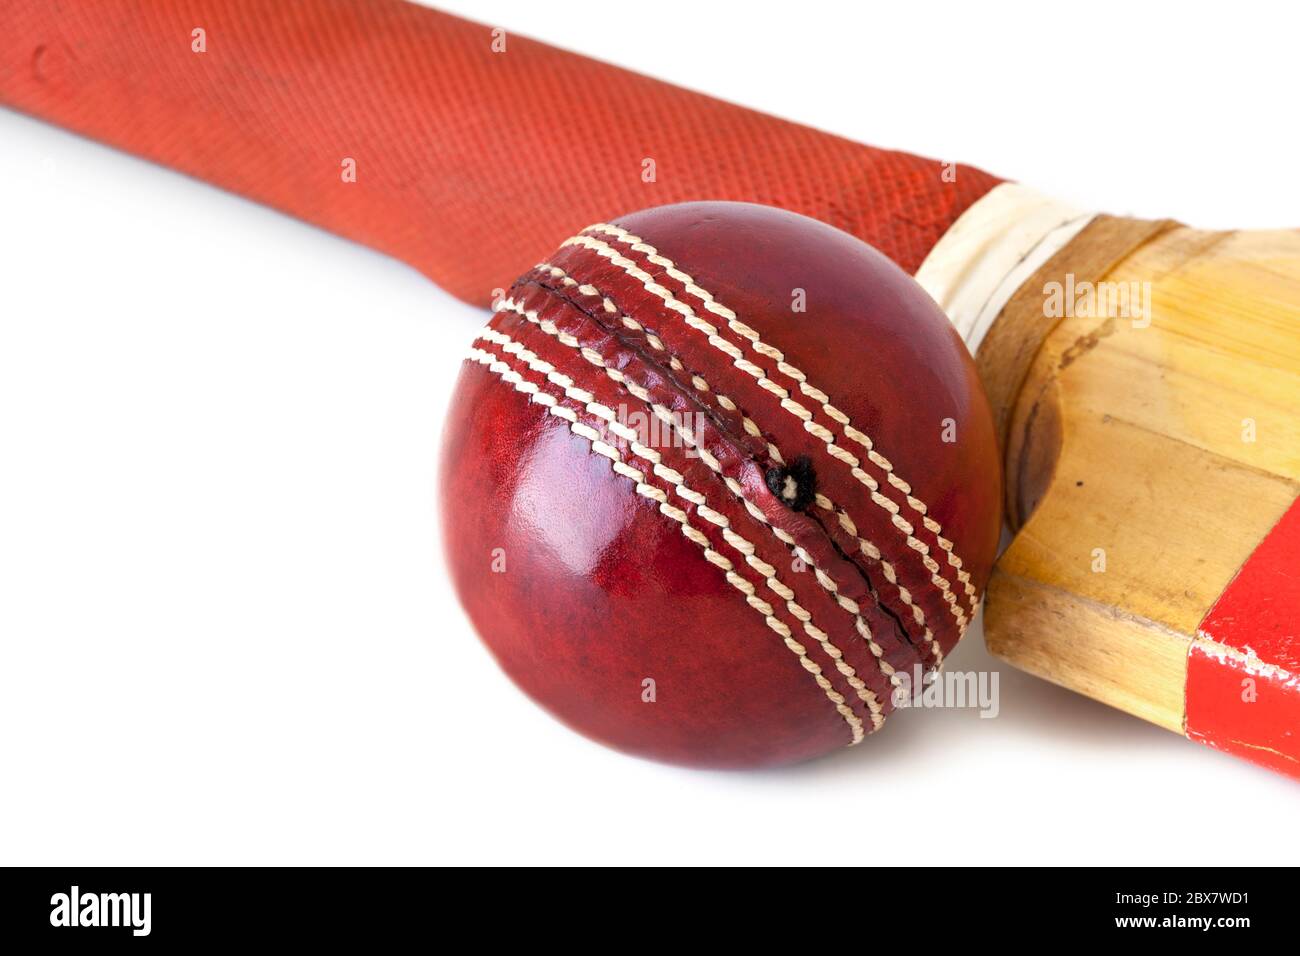 Old cricket bat and cricket ball, over white background. Stock Photo